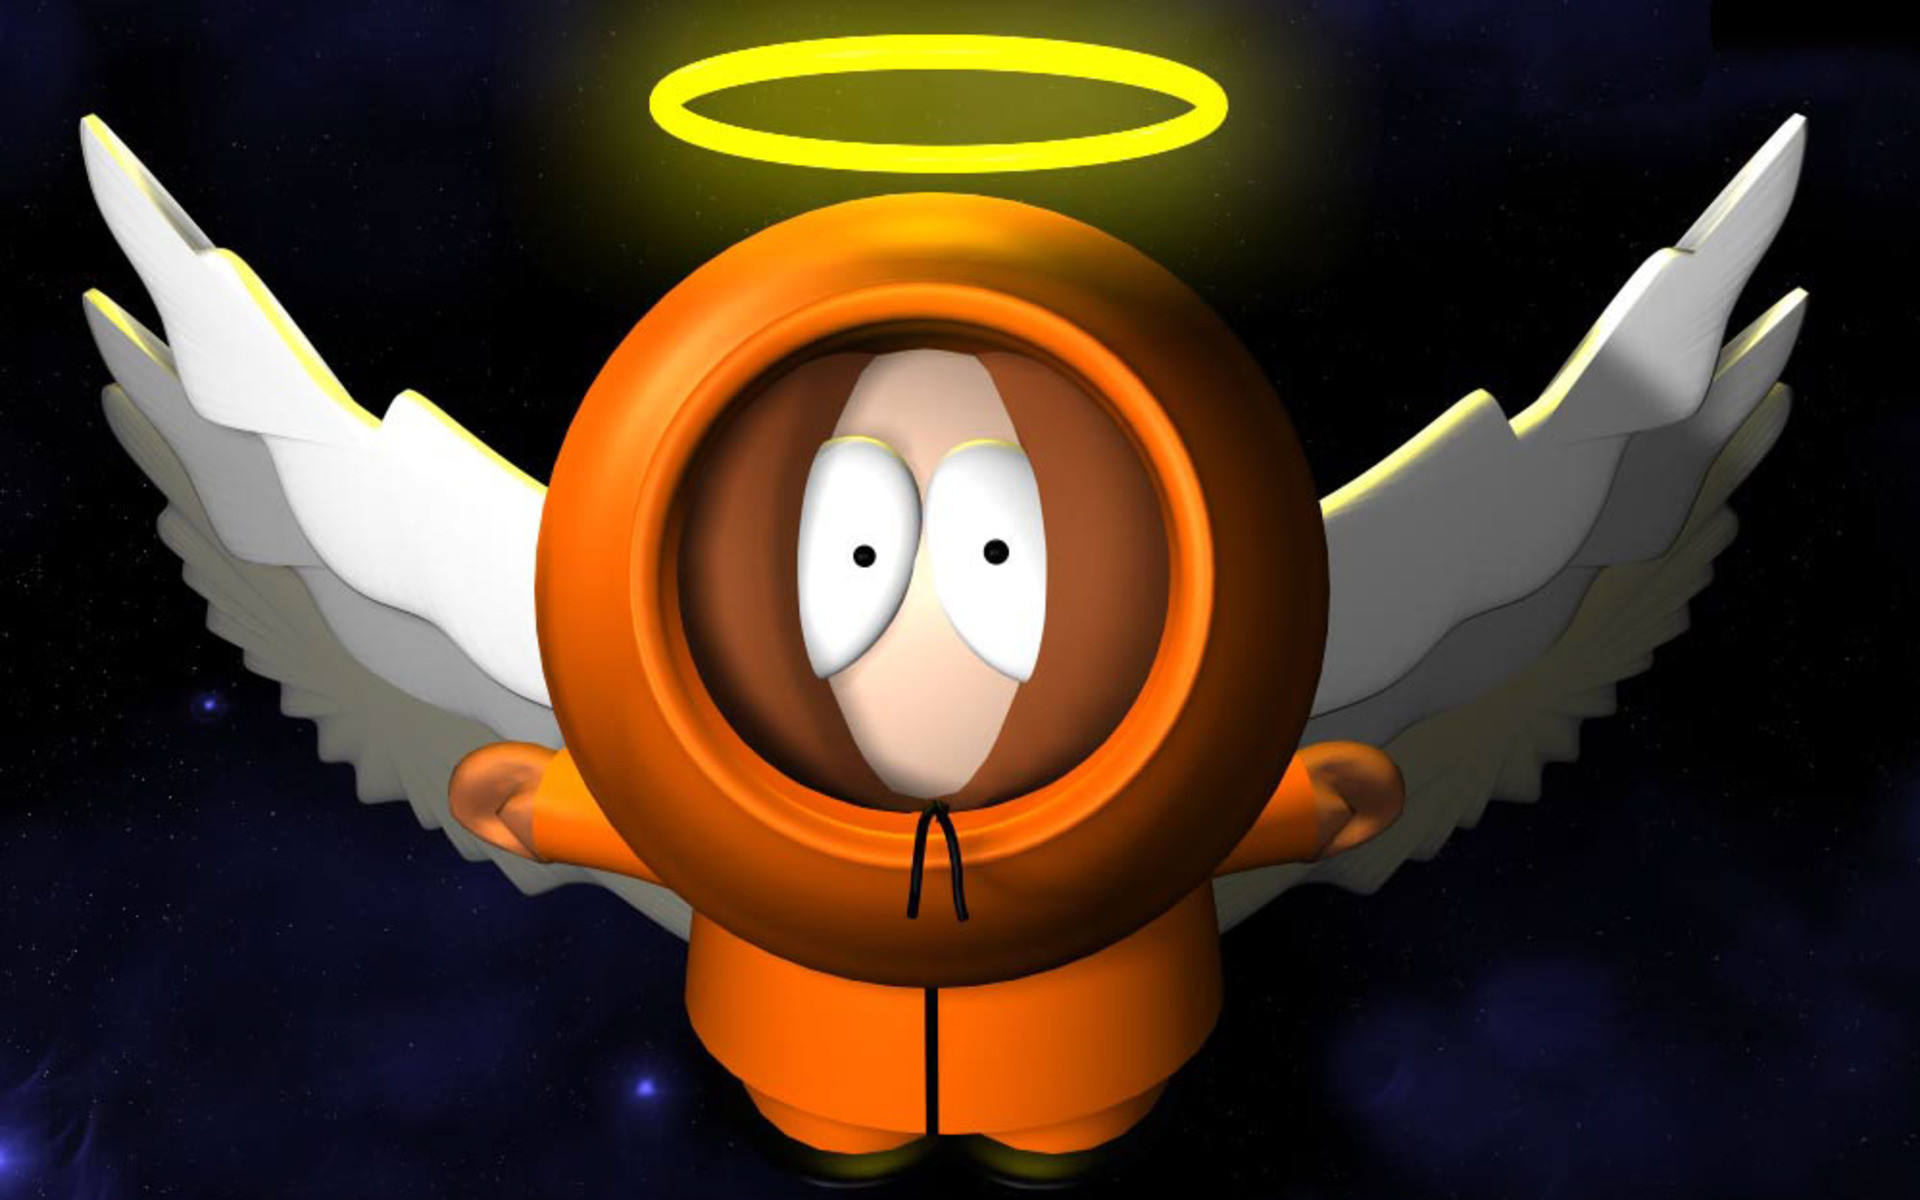 1920x1200 South Park images kenny HD wallpaper and background photos